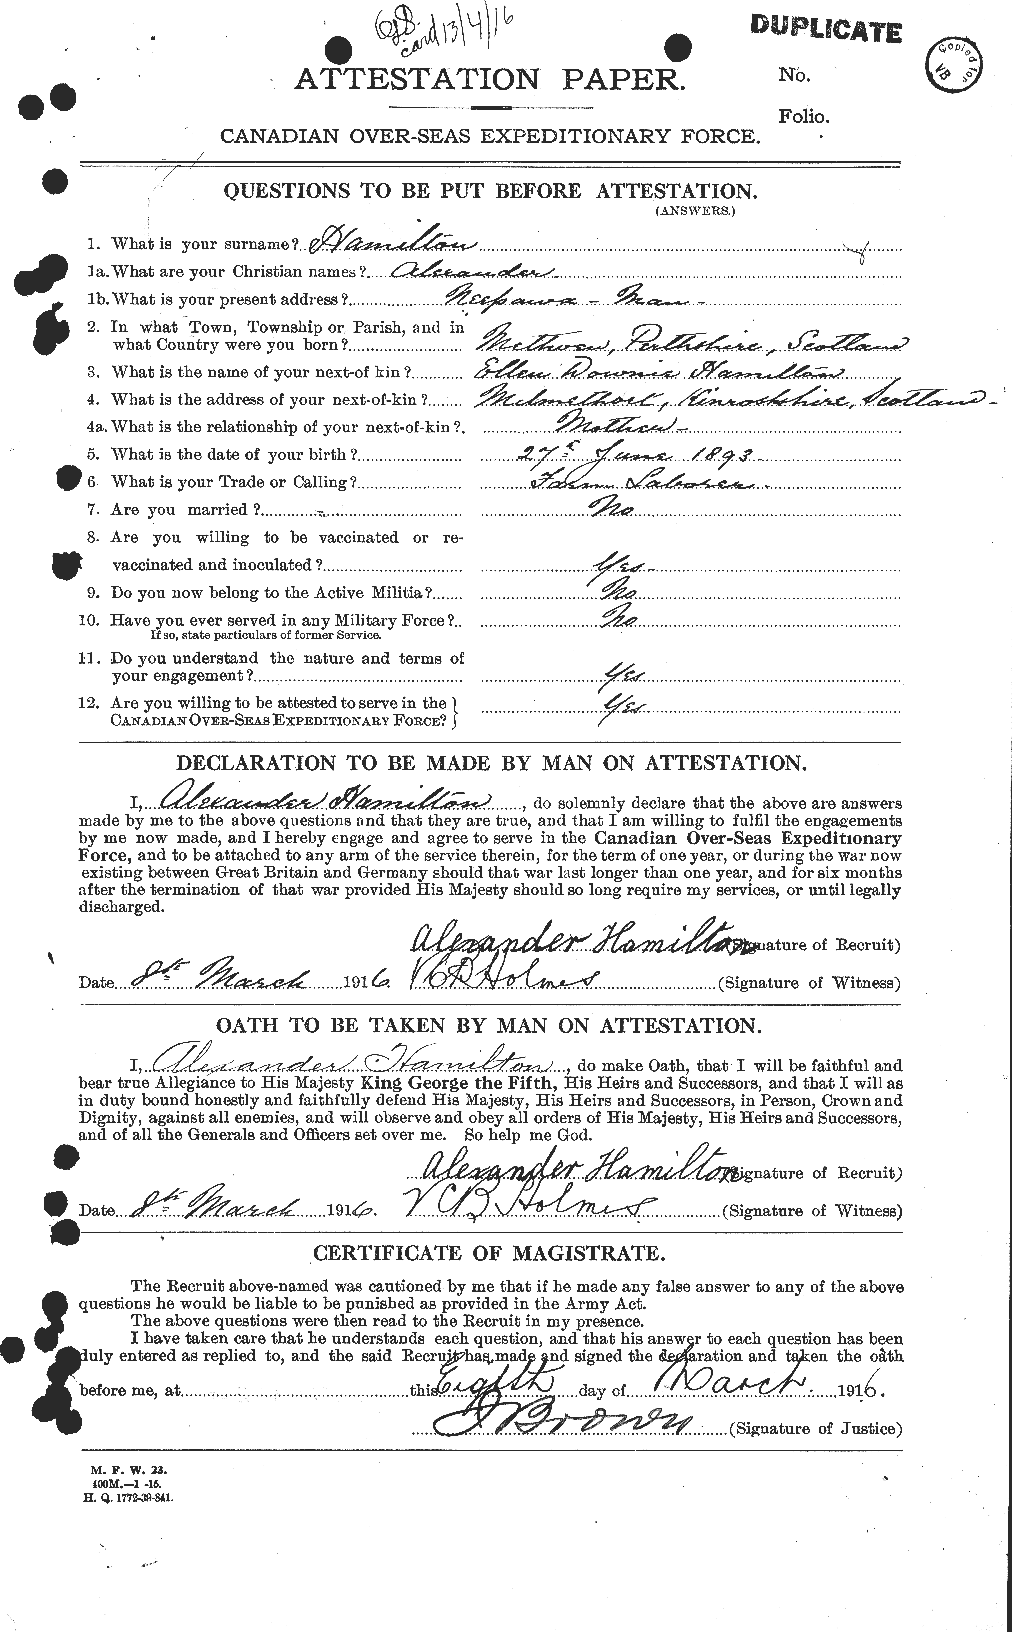 Personnel Records of the First World War - CEF 376886a